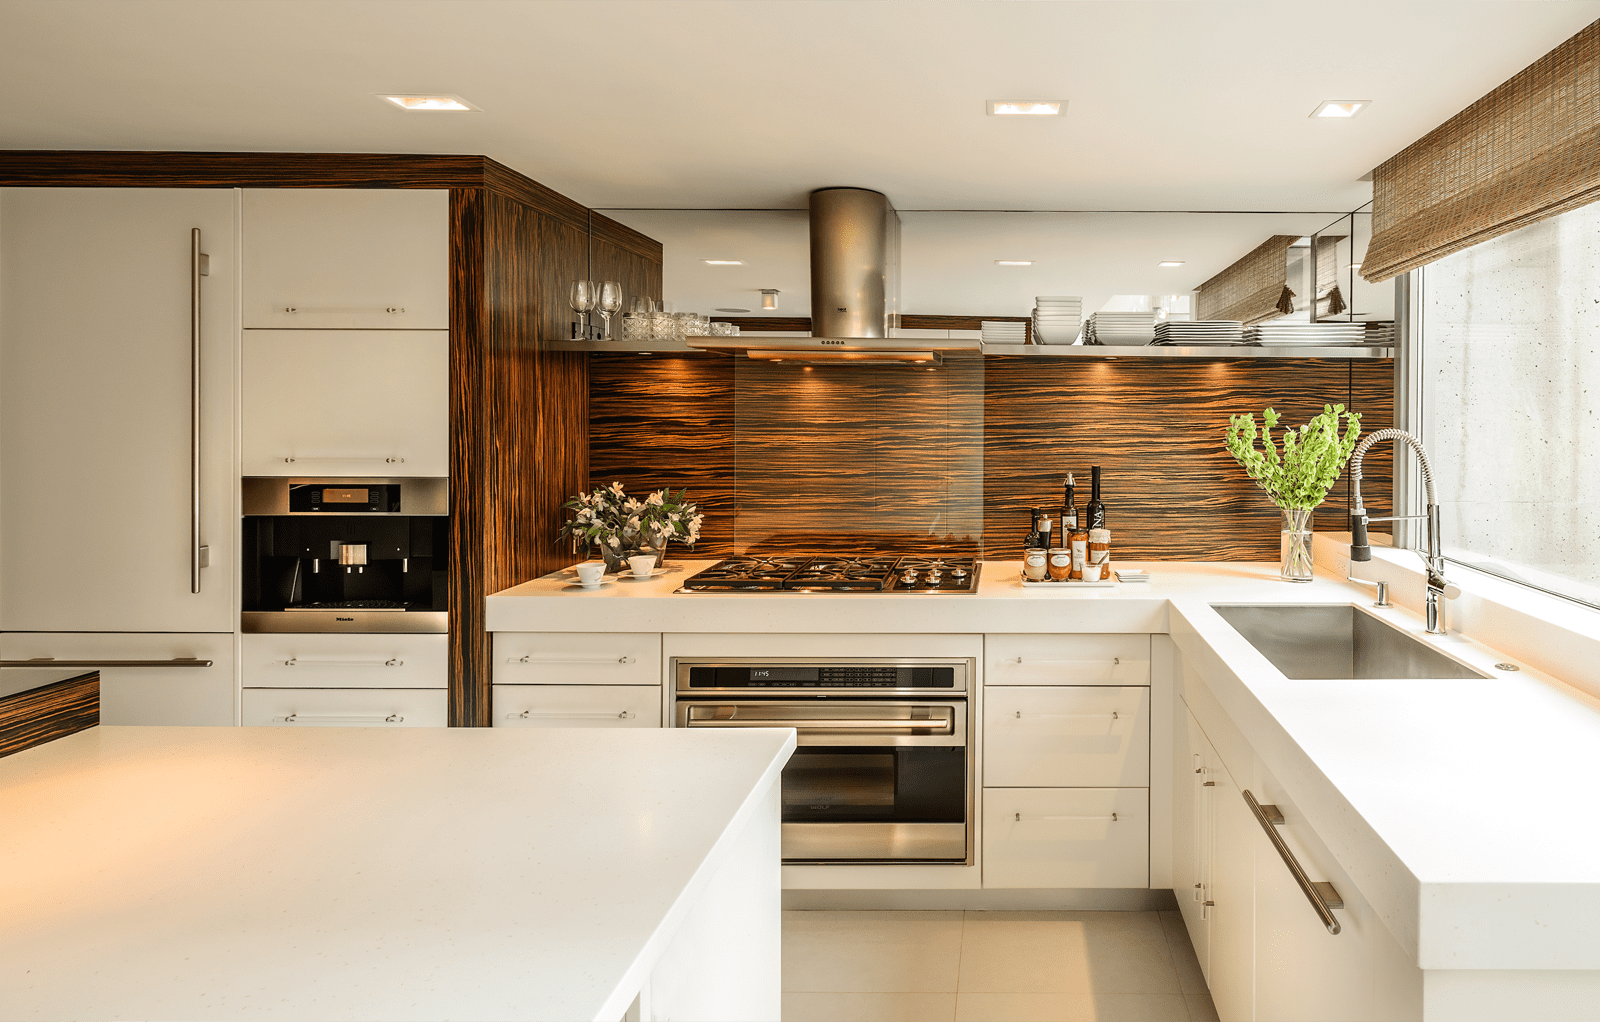 Industrial aesthetic: kitchen design - Completehome